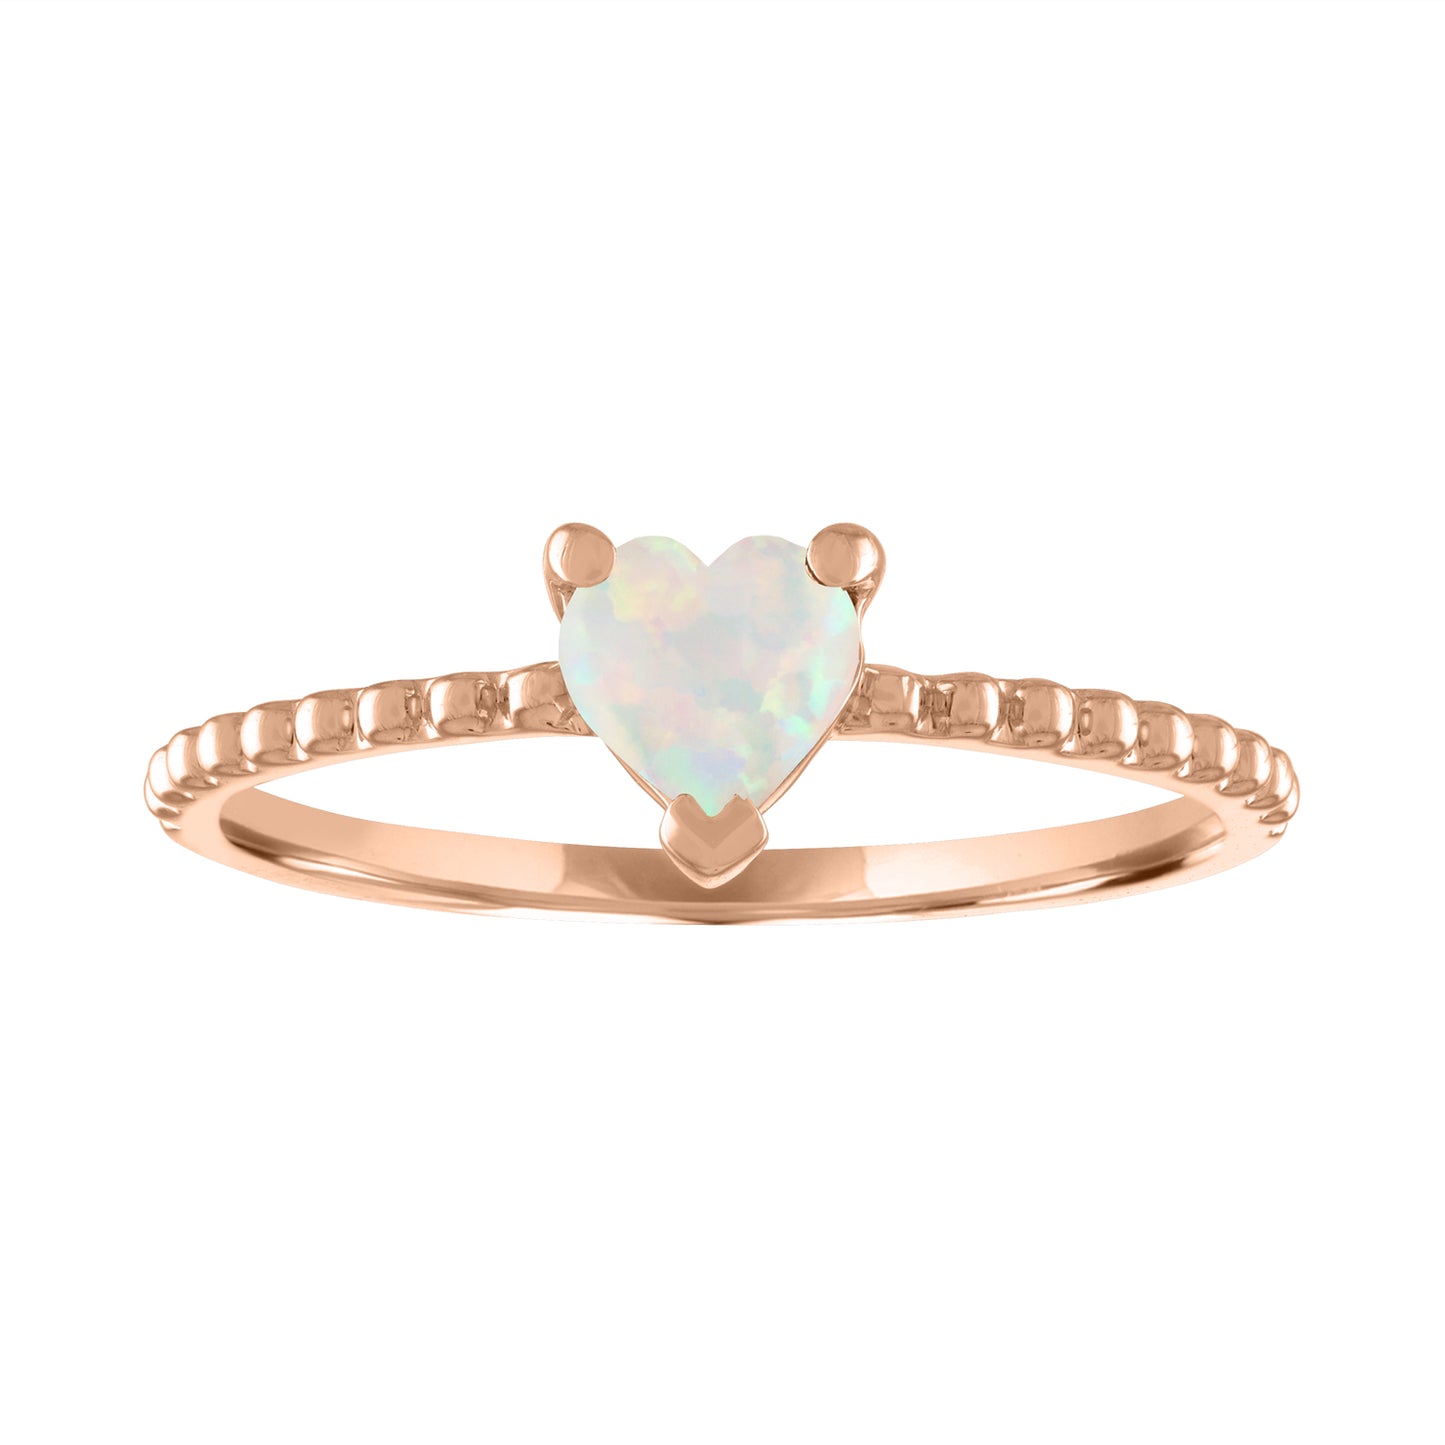 Rose gold beaded skinny band with a heart shaped opal in the center. 